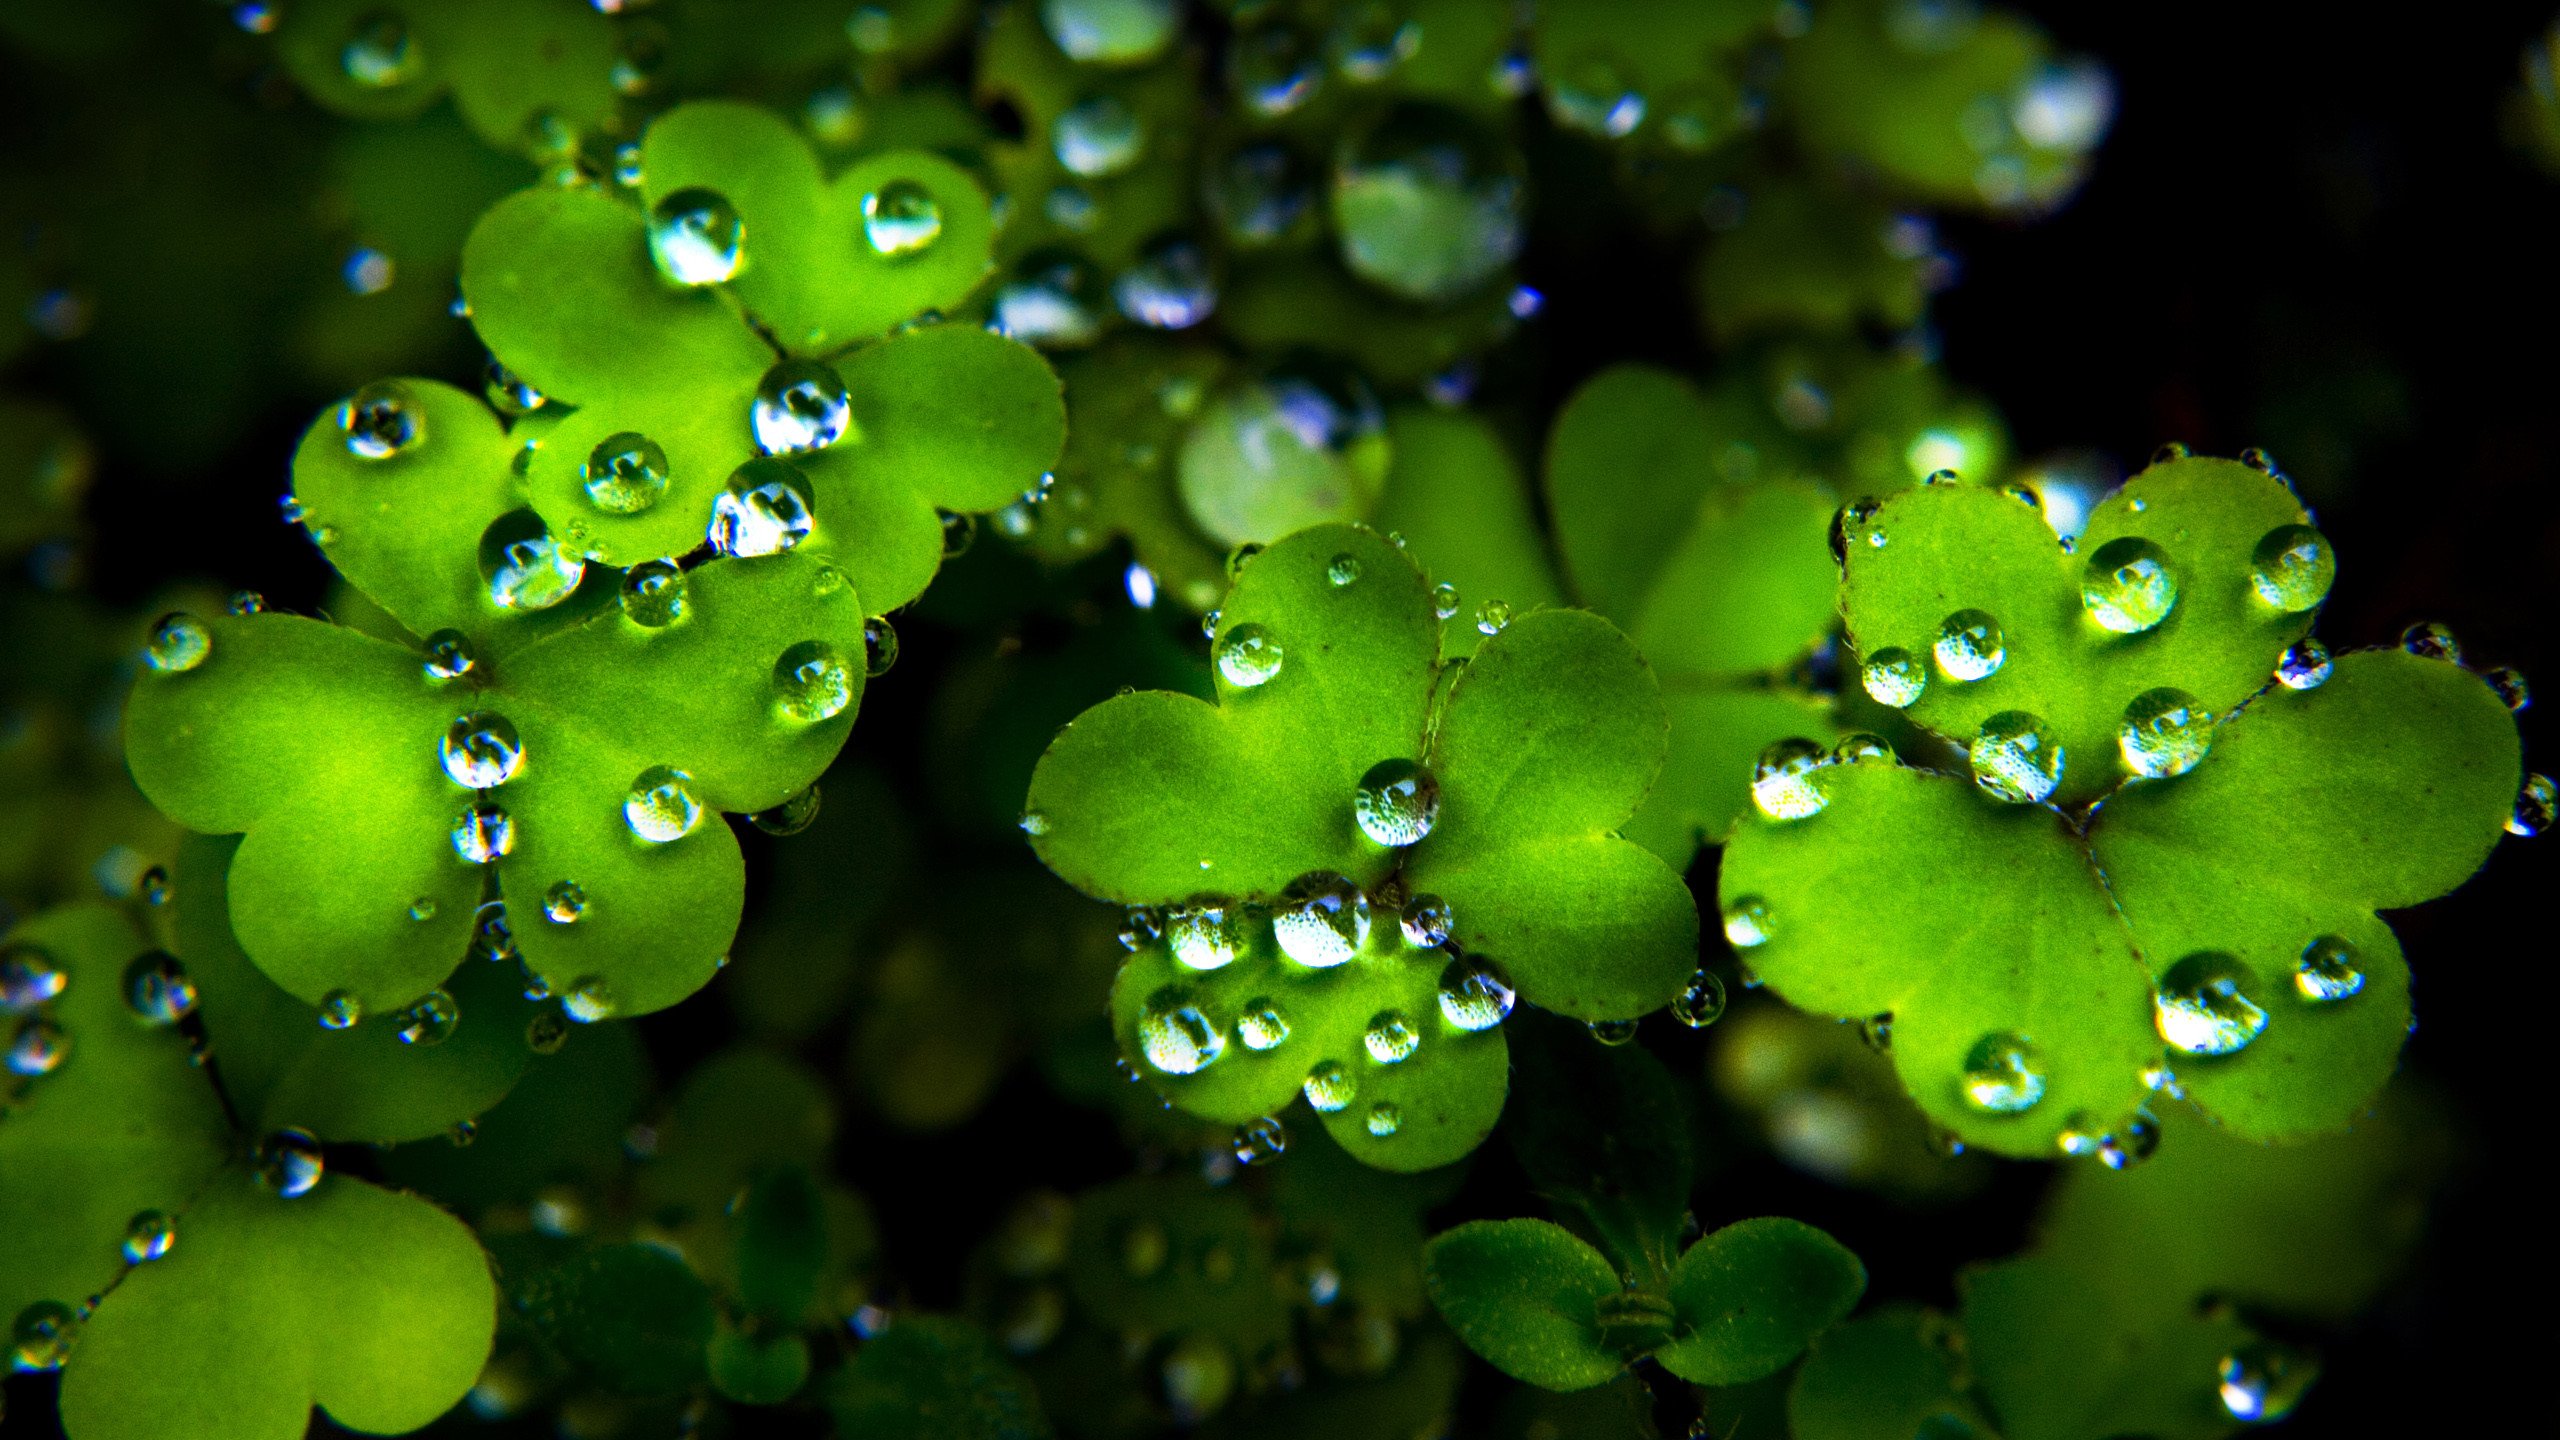 Earth Clover HD Wallpaper | Background Image